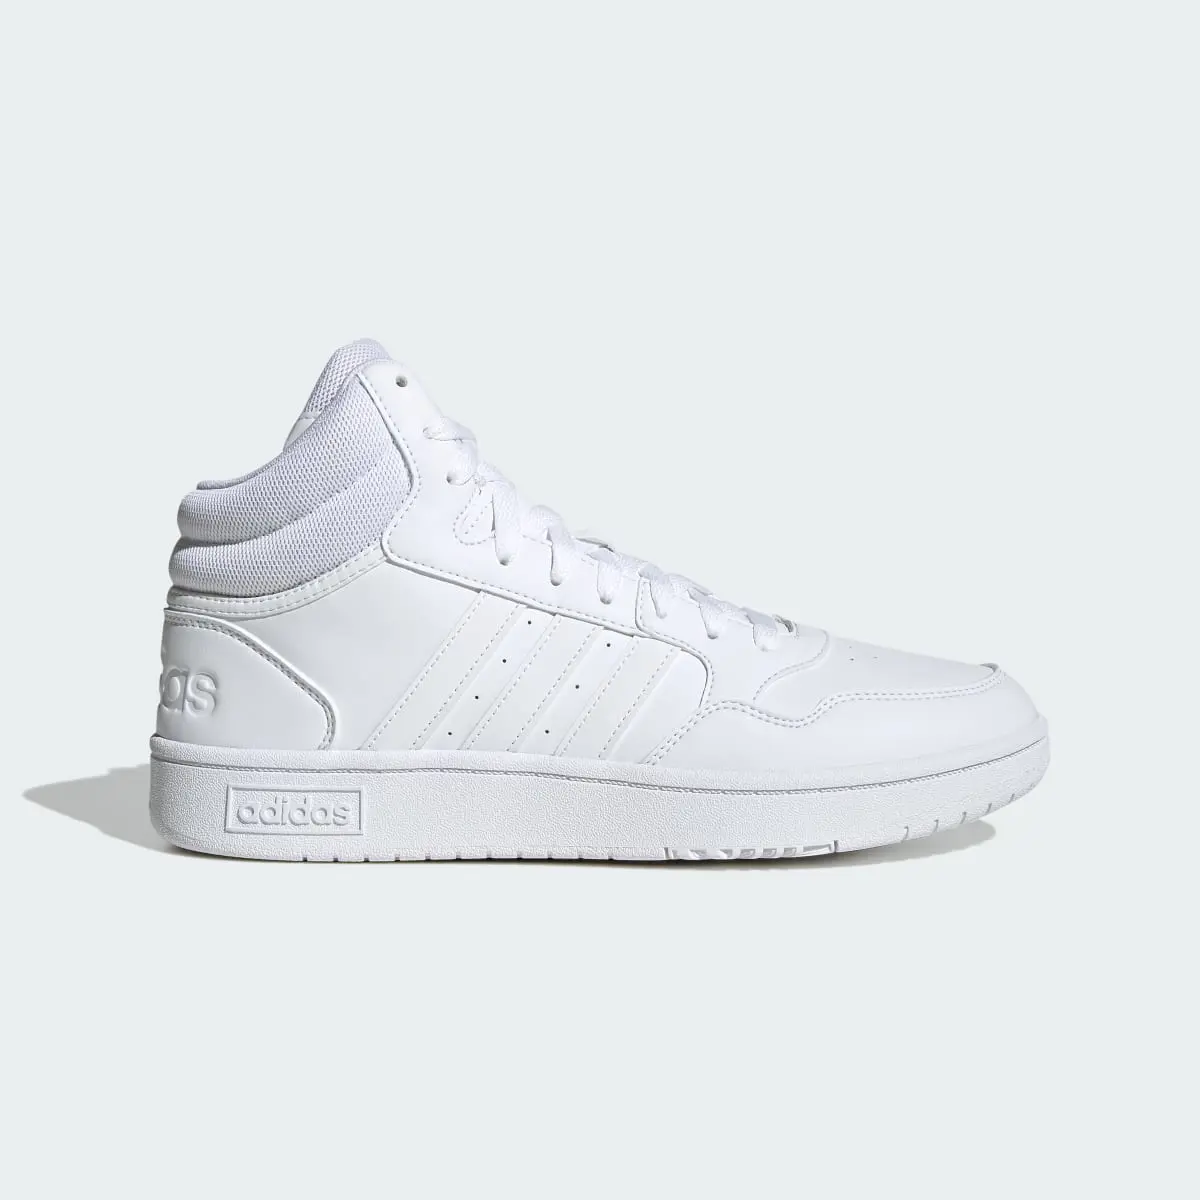 Adidas Hoops 3.0 Mid Lifestyle Basketball Classic Vintage Shoes. 2